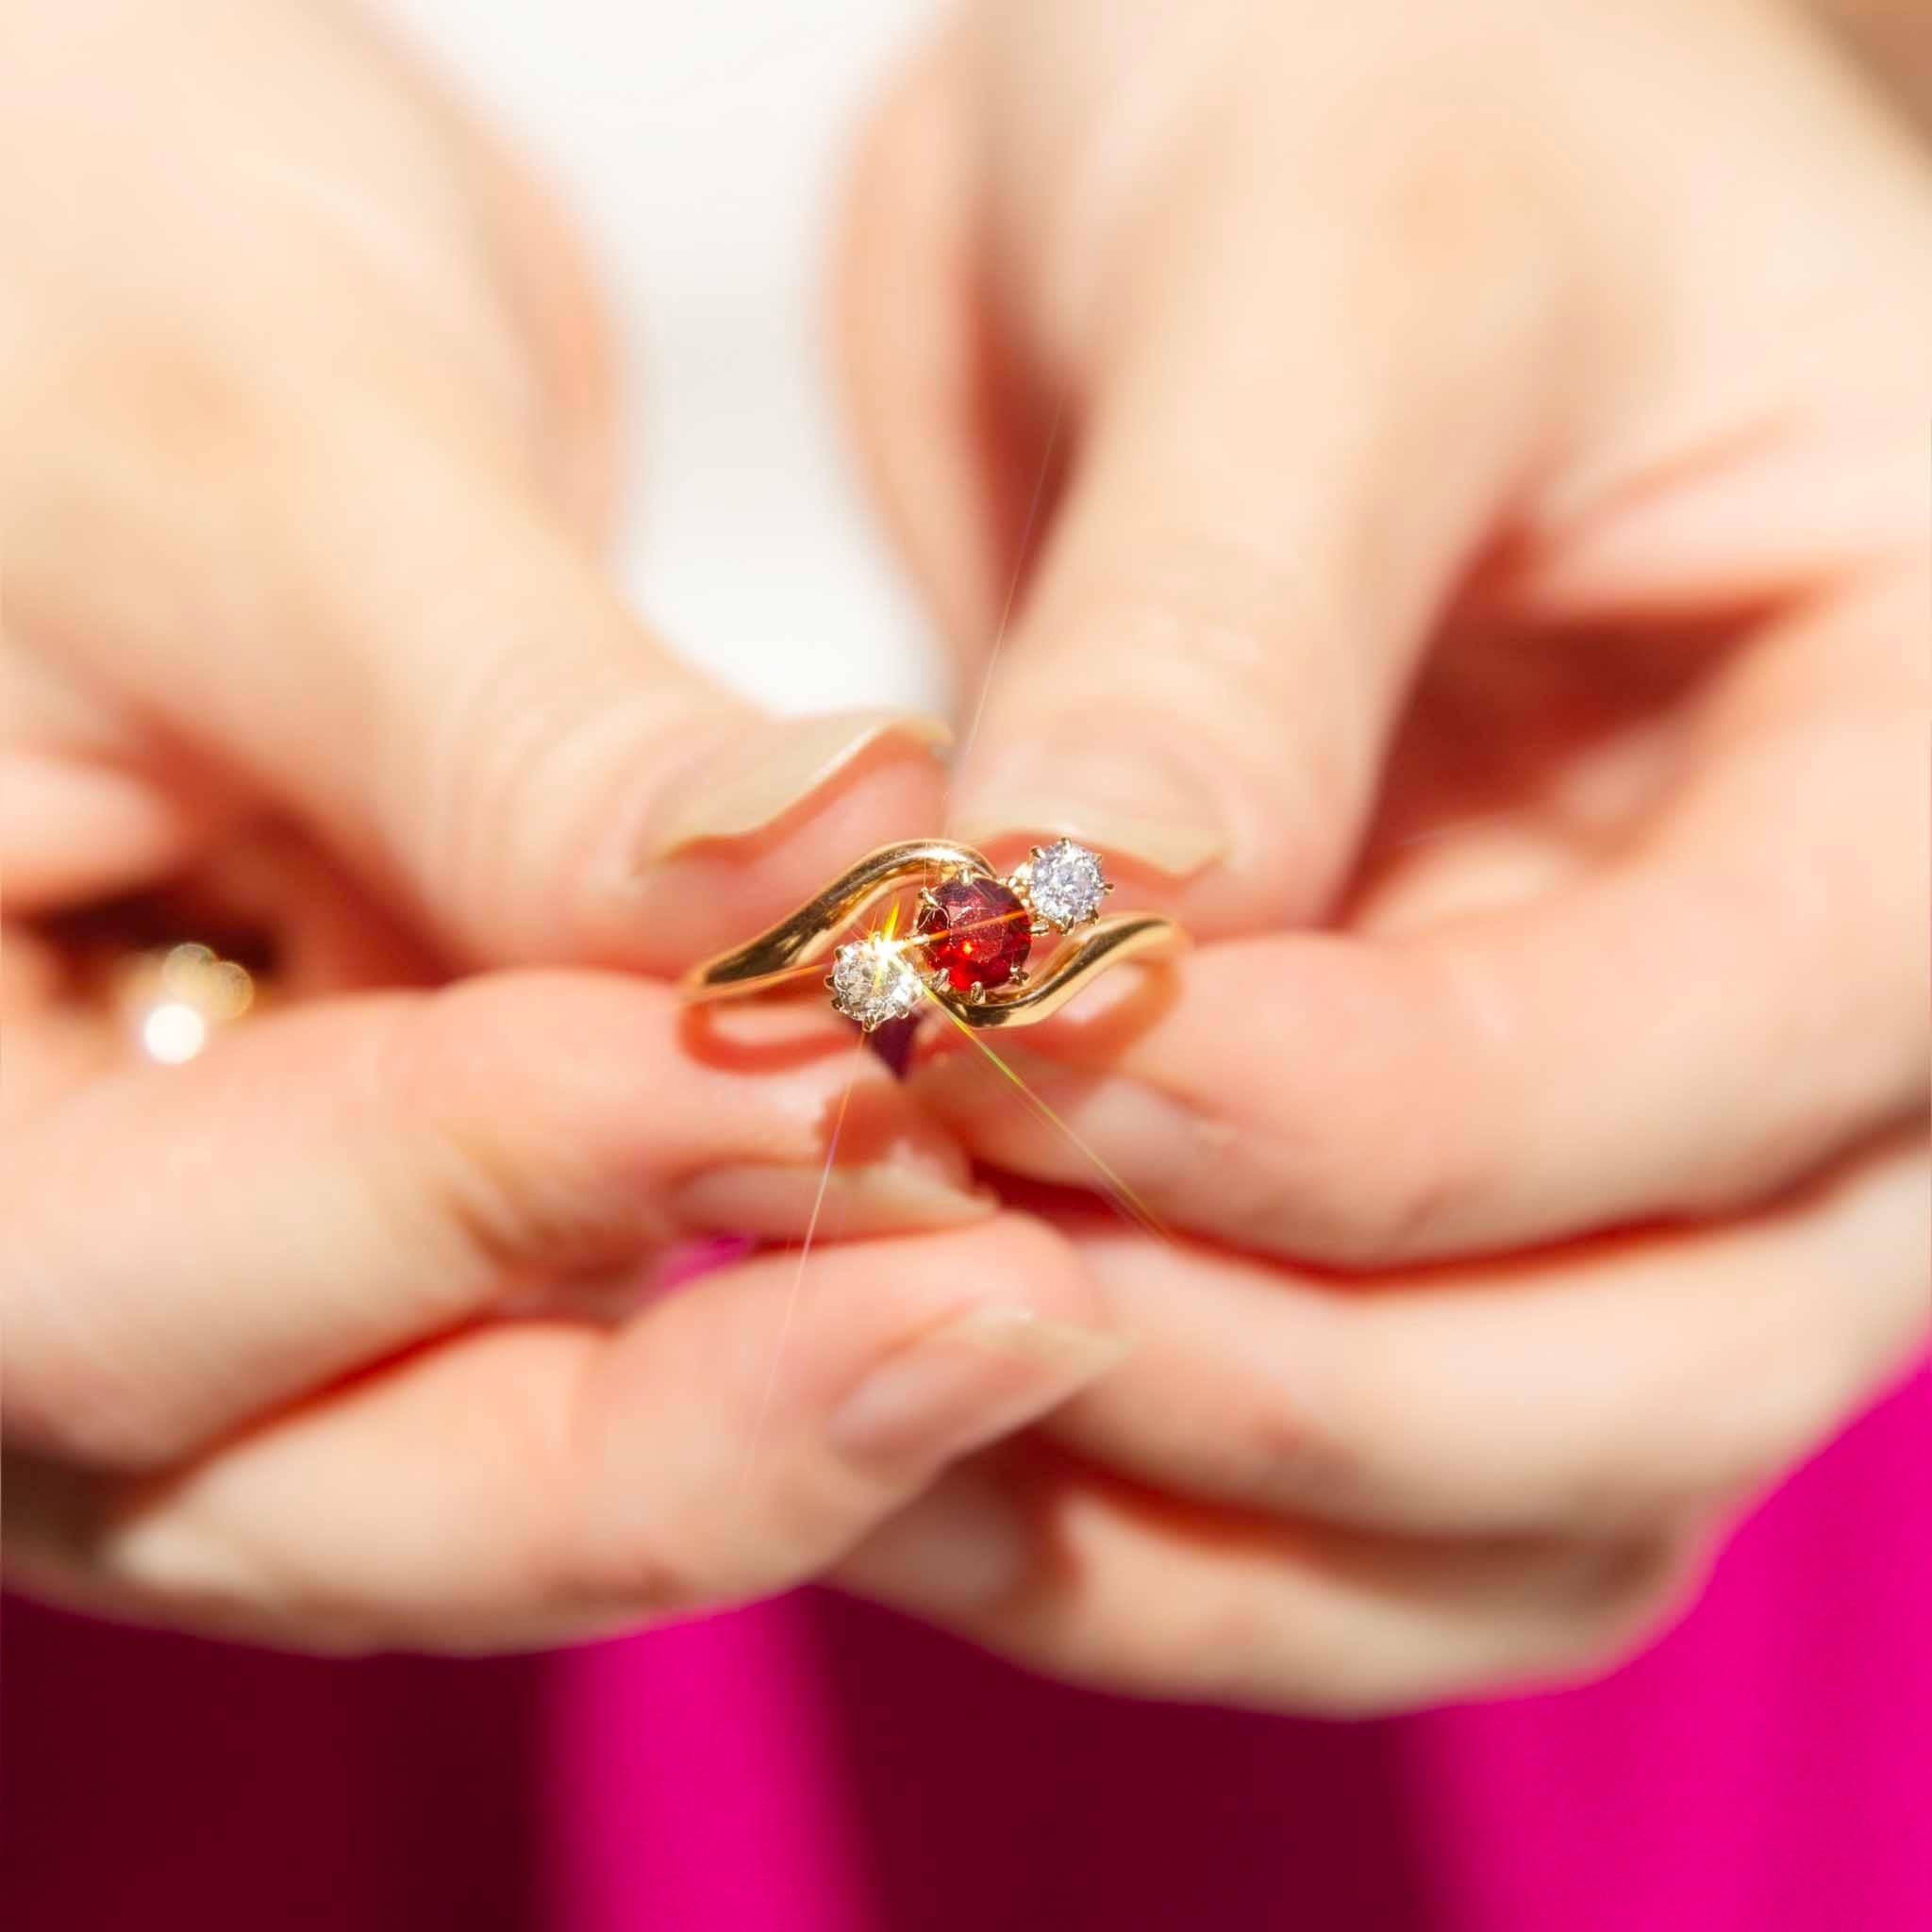 Elegance and refinement come together wonderfully in The Brielle Ring. An enchanting one almandine garnet flanked by two shimmering round diamonds, all set carefully into a trio of claw settings held in the loving embrace of gleaming crossover